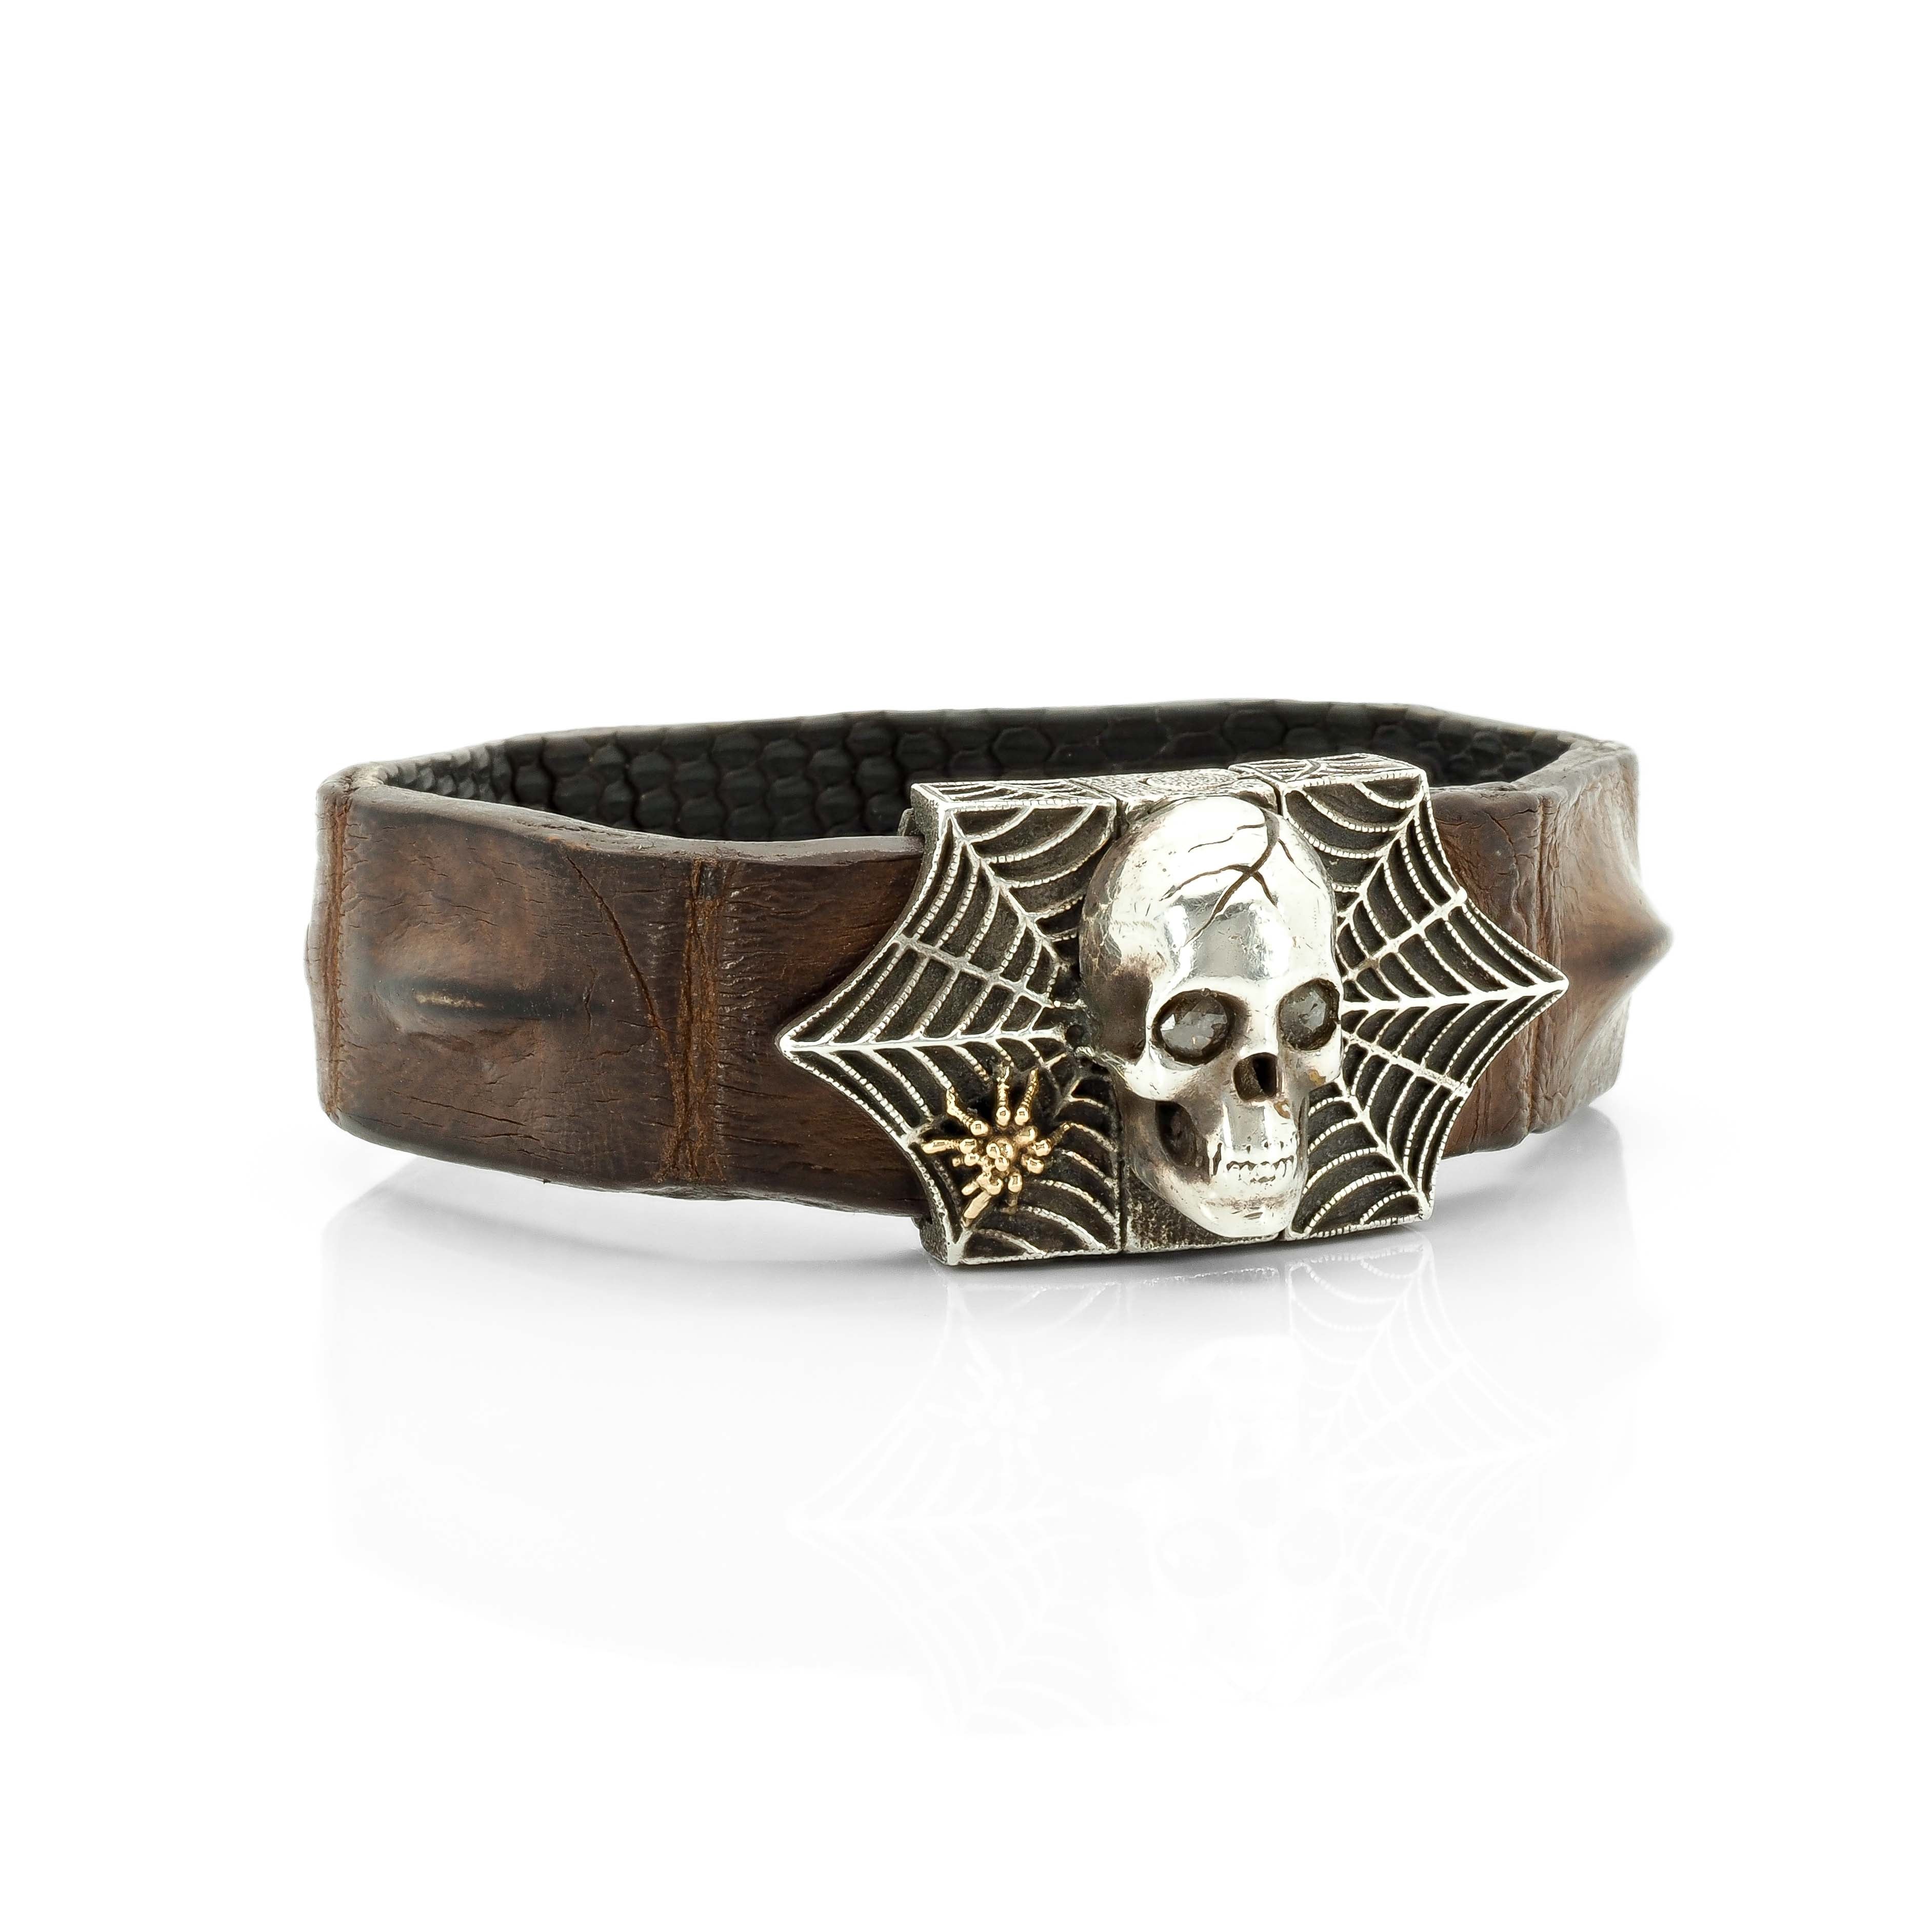 Skull and Spider Web Bracelet with Brown Diamonds